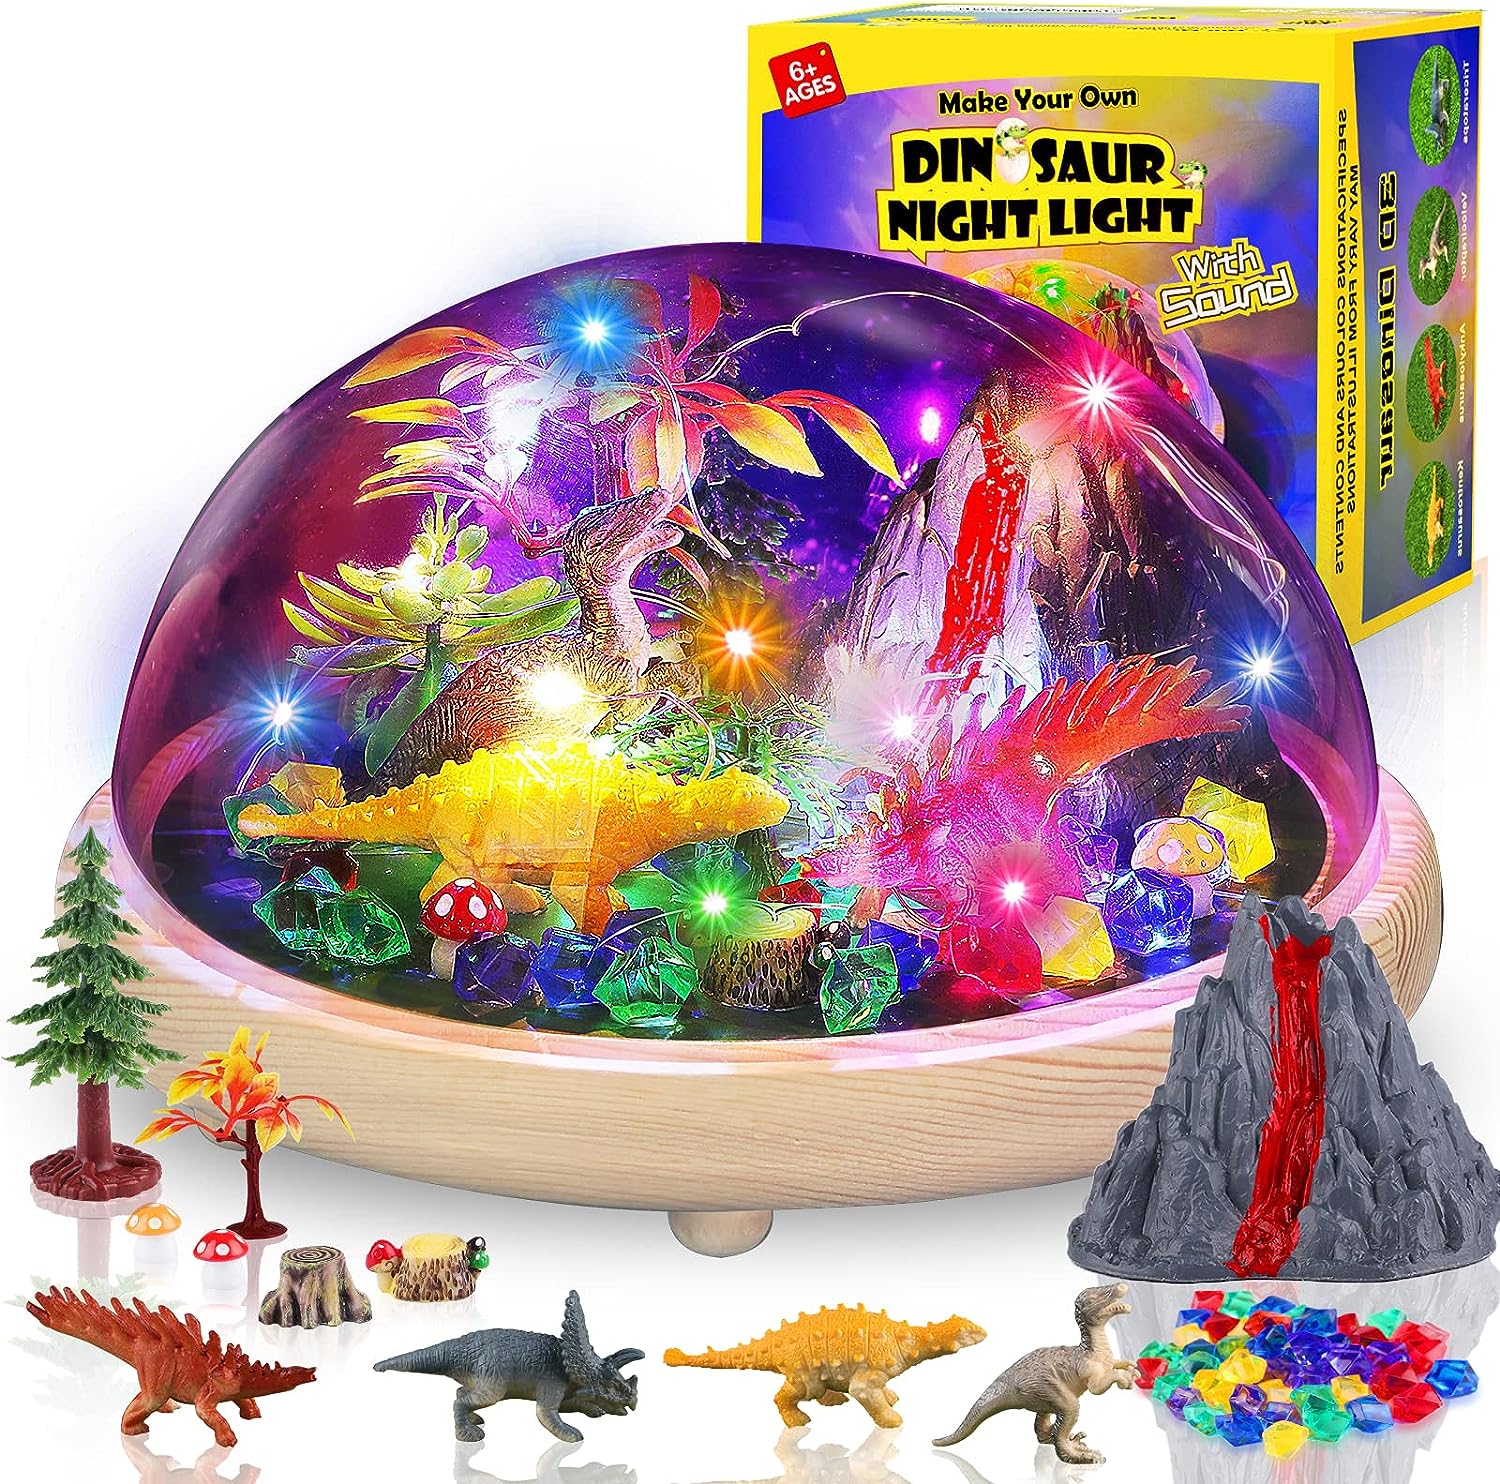 Alritz Dinosaur Boys Sound Toys with Realistic Roars – Make Your Own Night Light Creative Craft Kit Gift for Boys Birthday Ages 6 7 8 9 10 11 12